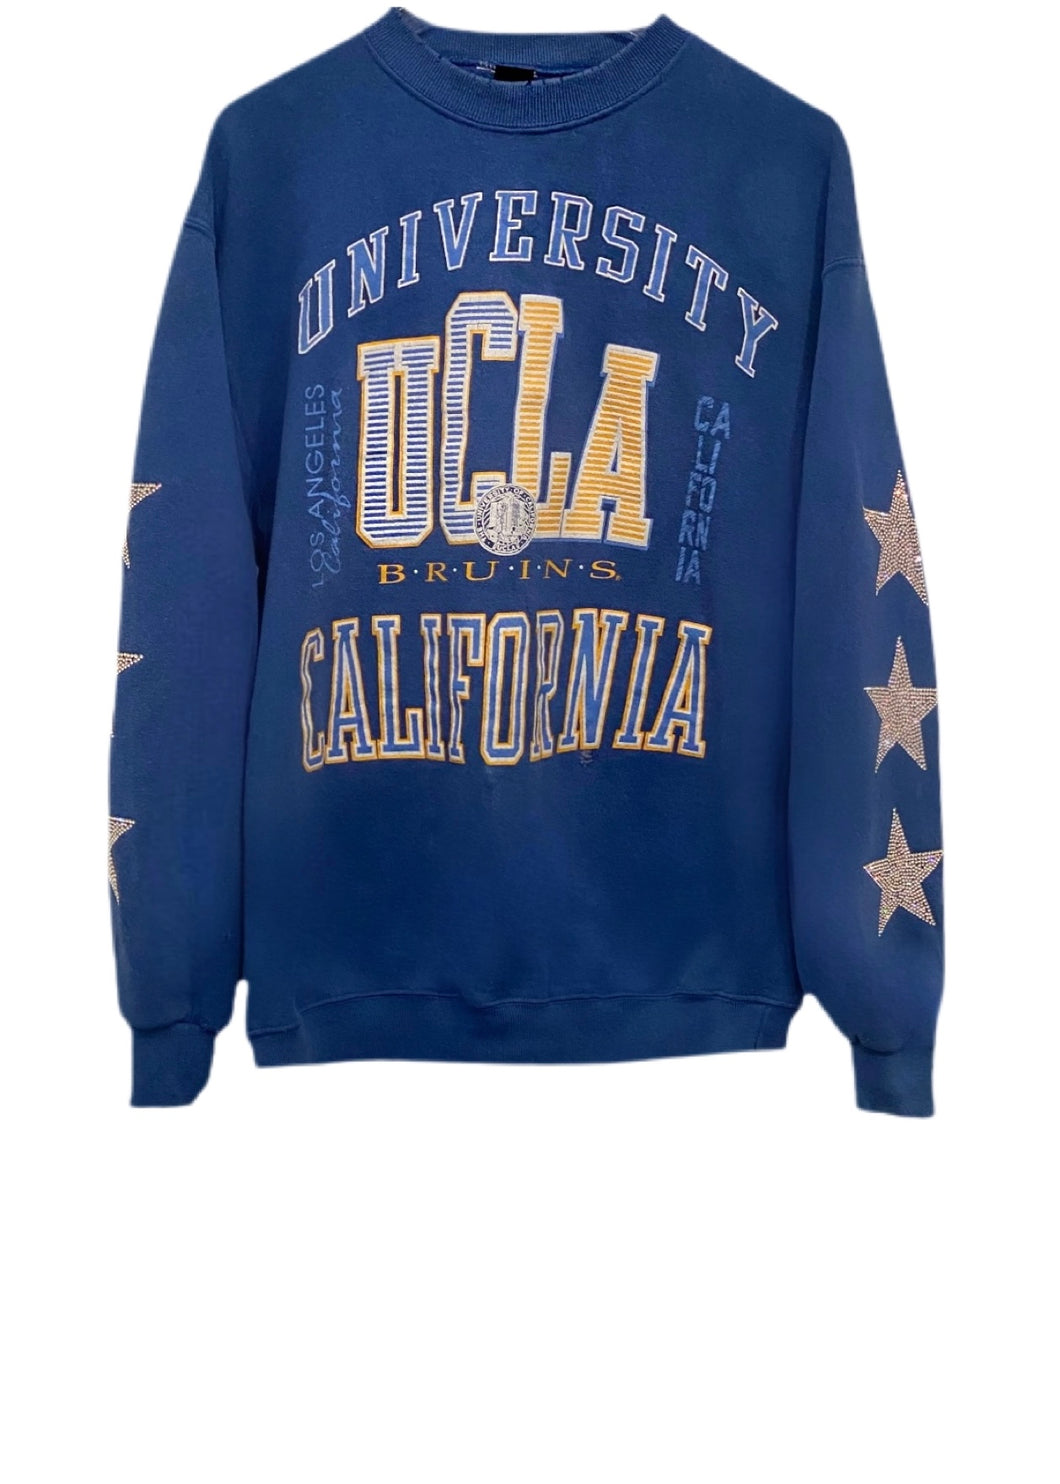 University of California Los Angeles, One of a KIND Vintage Bruins UCLA with Three Crystals Star Design